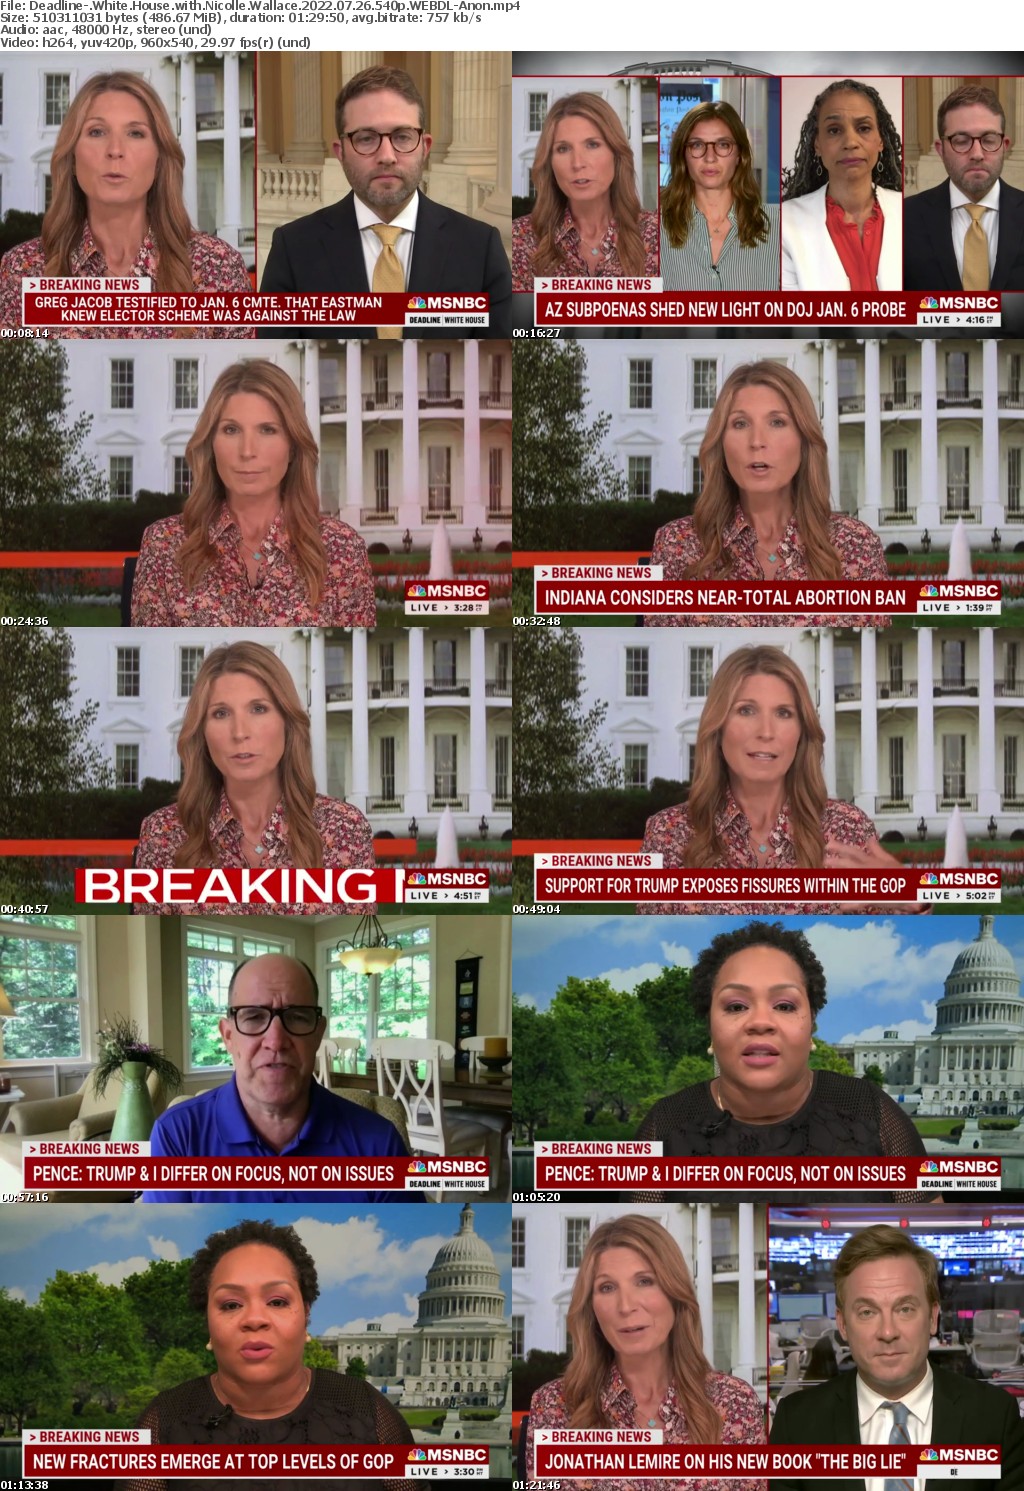 Deadline- White House with Nicolle Wallace 2022 07 26 540p WEBDL-Anon